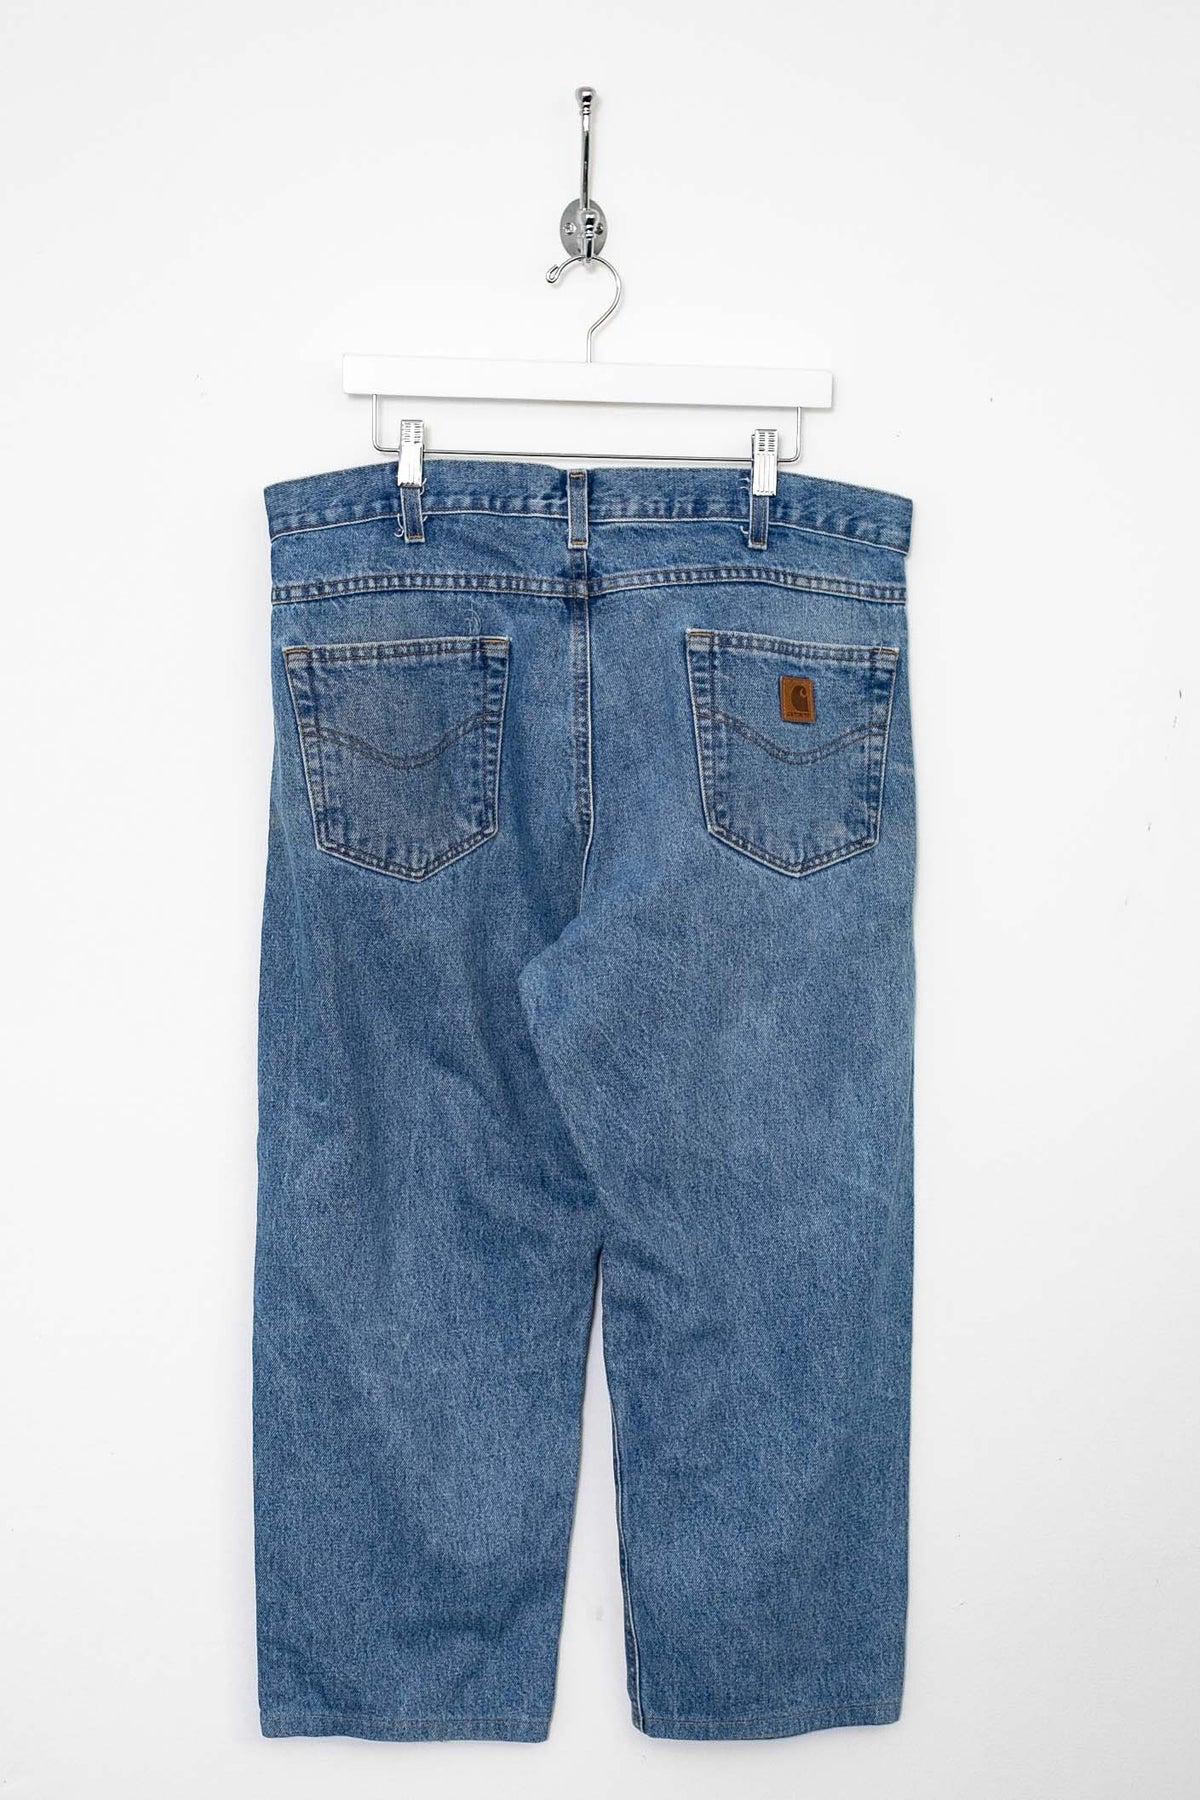 00s Carhartt Cropped Jeans (L)